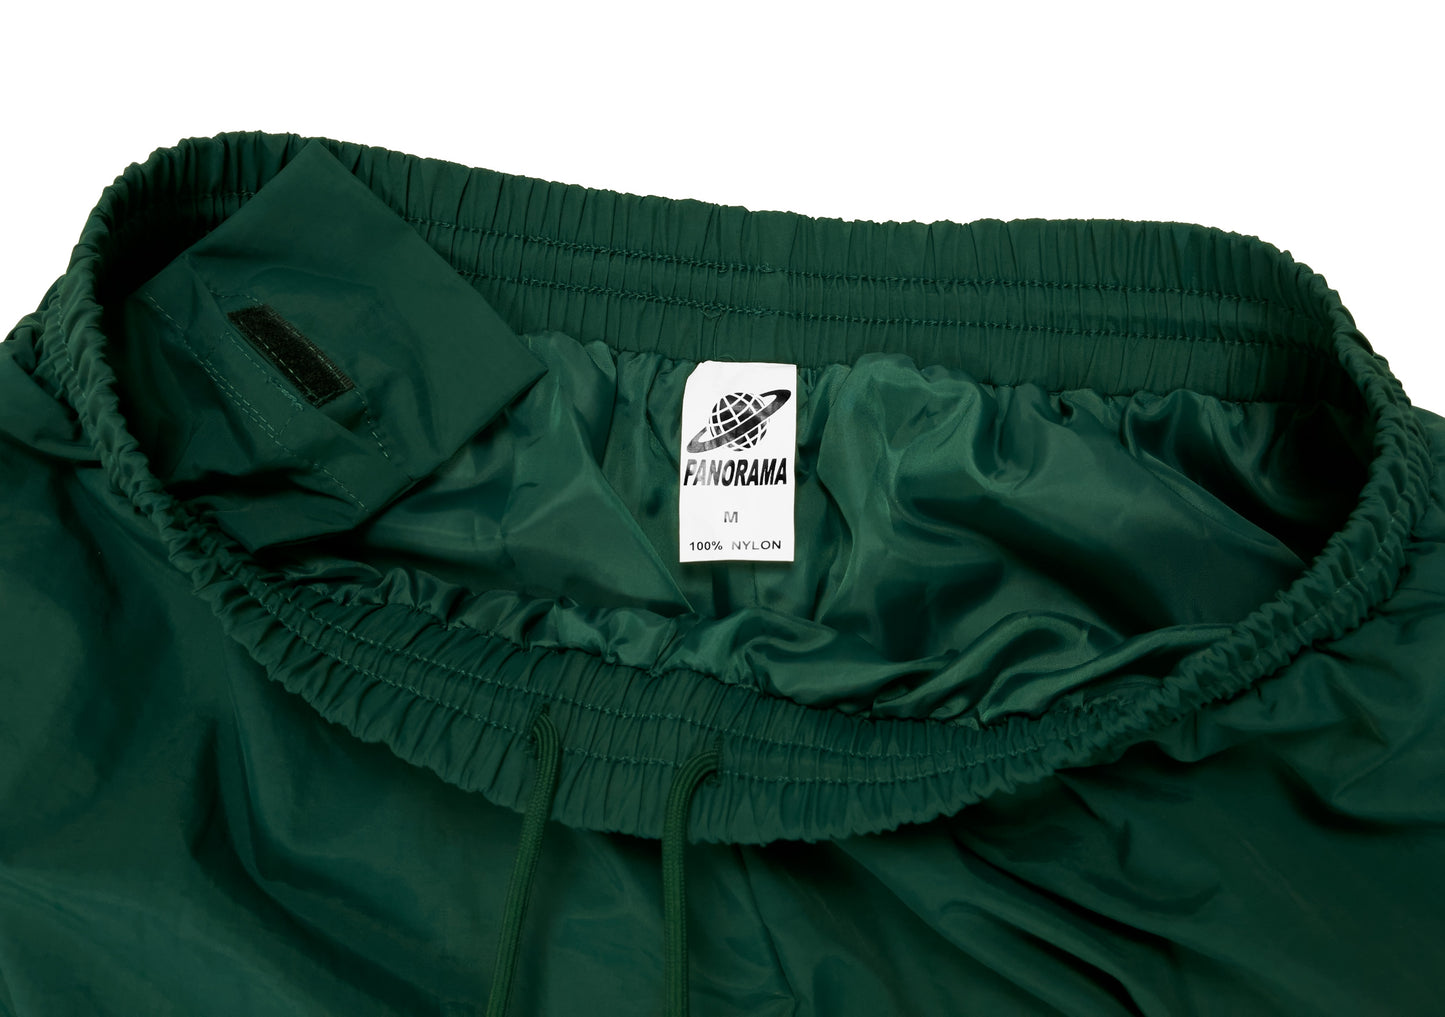 Green Lined Track Pants